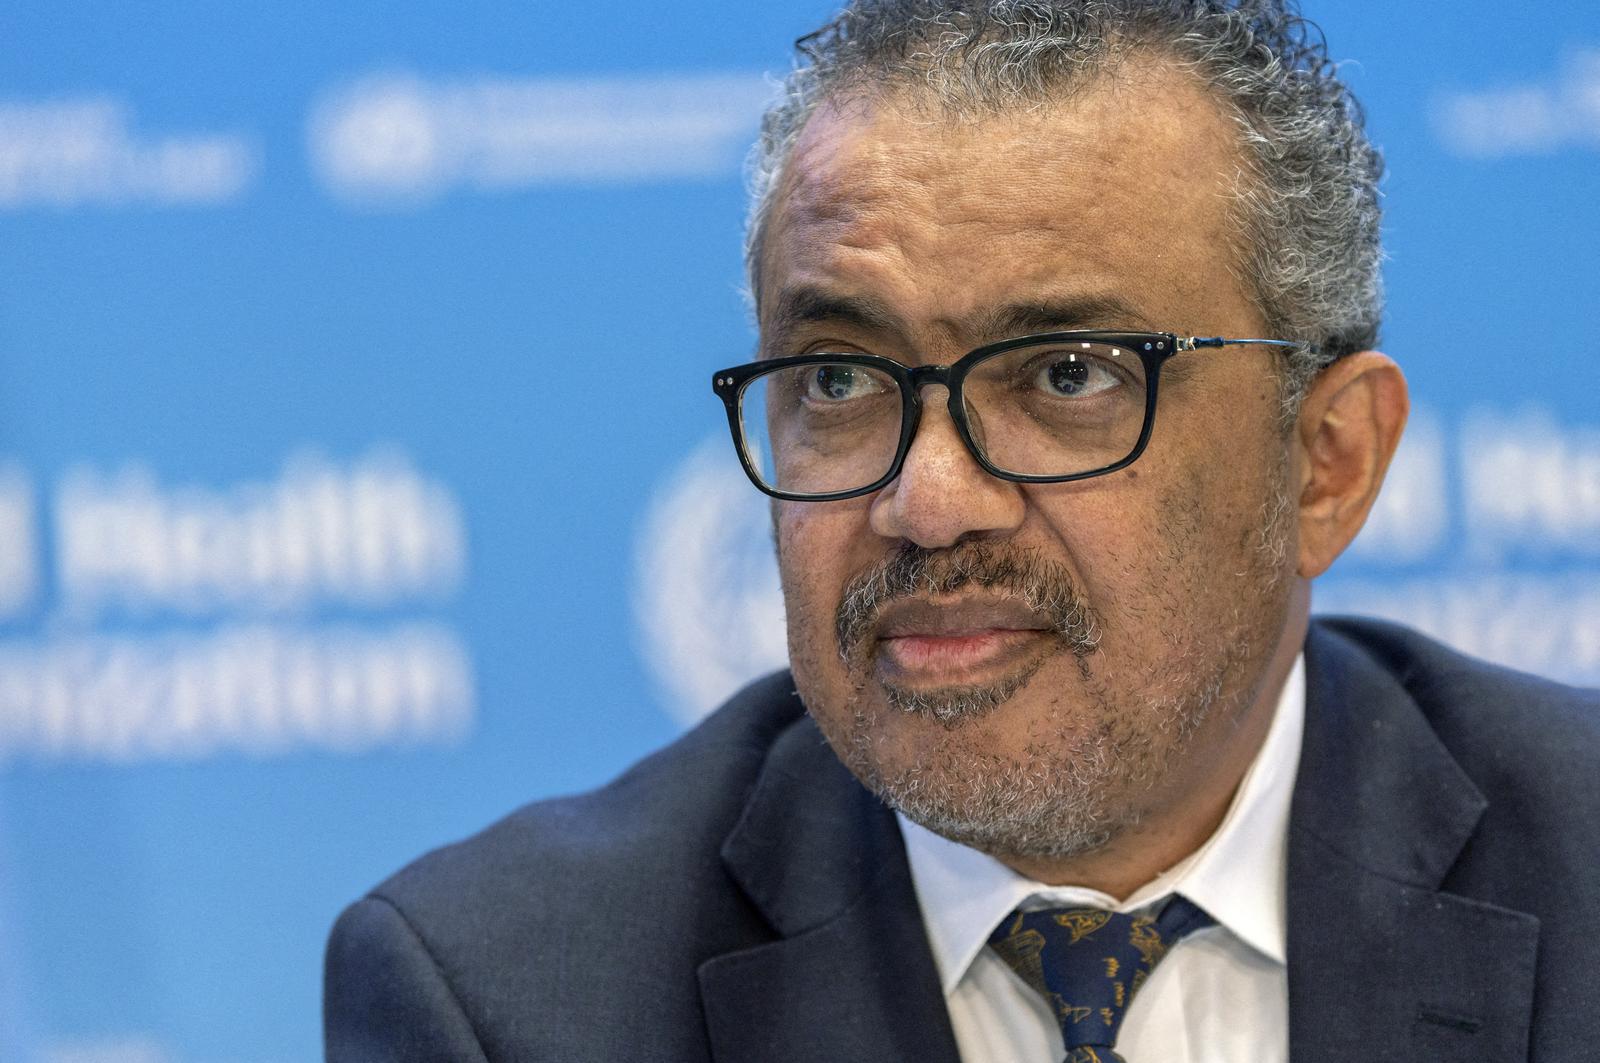 FILE PHOTO: Director-General of the World Health Organisation (WHO) Dr. Tedros Adhanom Ghebreyesus attends an ACANU briefing on global health issues, including COVID-19 pandemic and war in Ukraine in Geneva, Switzerland, December 14, 2022. REUTERS/Denis Balibouse/File Photo Photo: DENIS BALIBOUSE/REUTERS